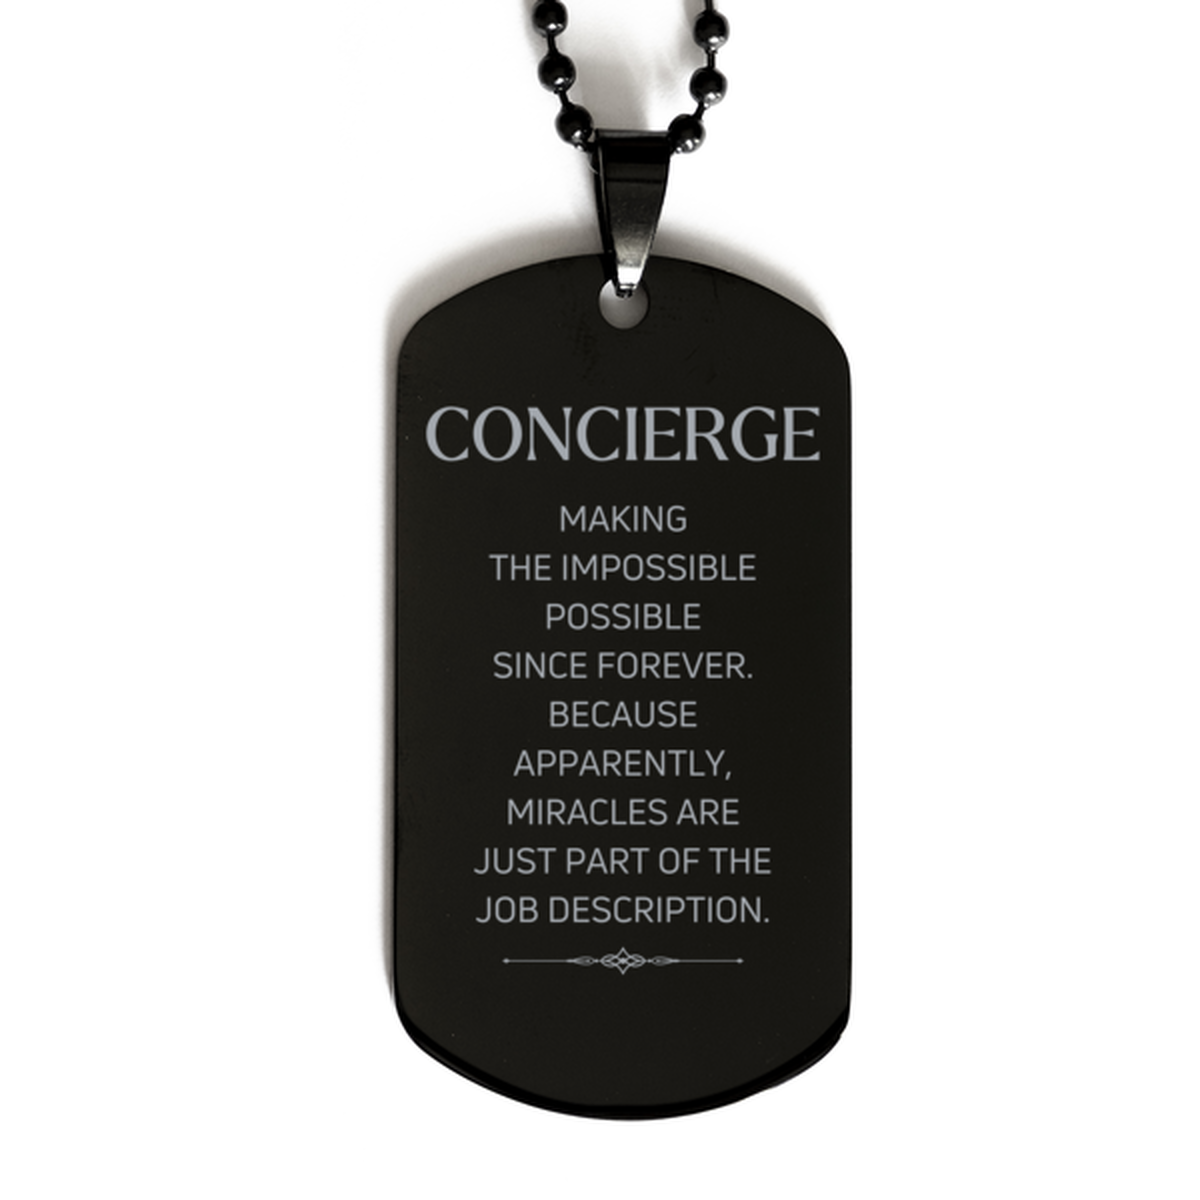 Funny Concierge Gifts, Miracles are just part of the job description, Inspirational Birthday Black Dog Tag For Concierge, Men, Women, Coworkers, Friends, Boss